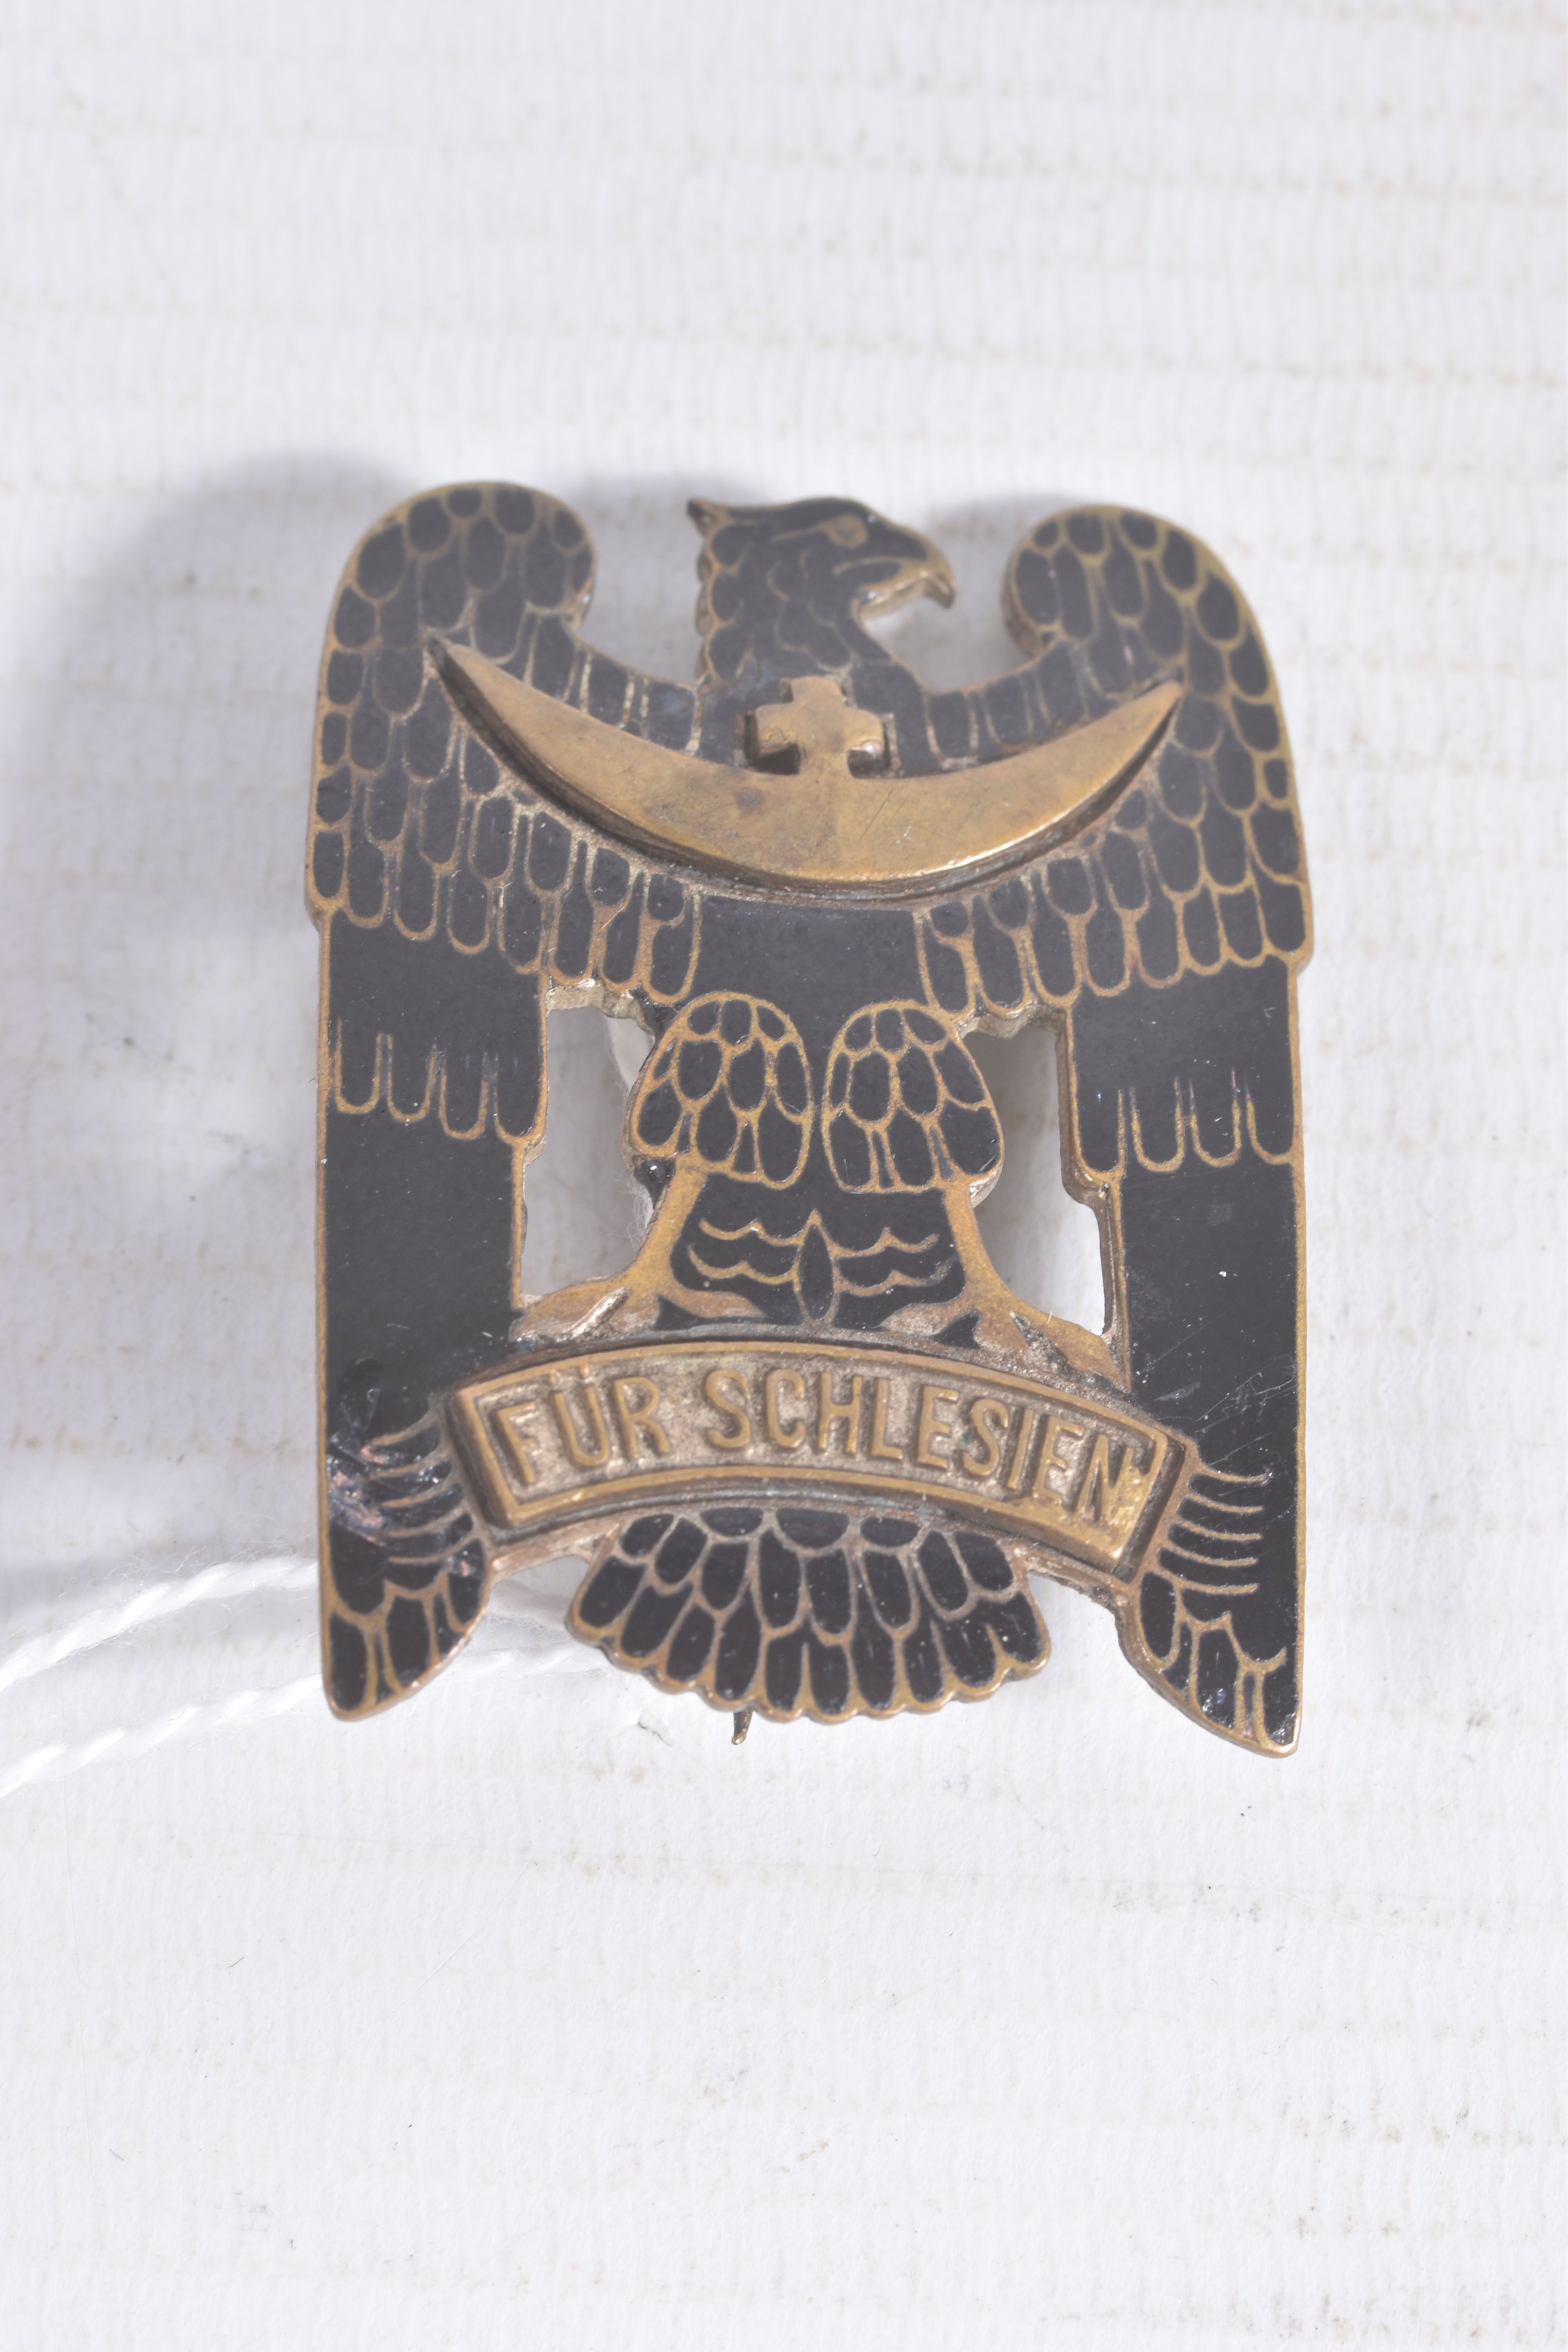 TWO GERMAN WEIMAR REPUBLIC FREIKORPS SILESIAN ORDER PIN BADGES, both badges are black enamel and - Image 5 of 6